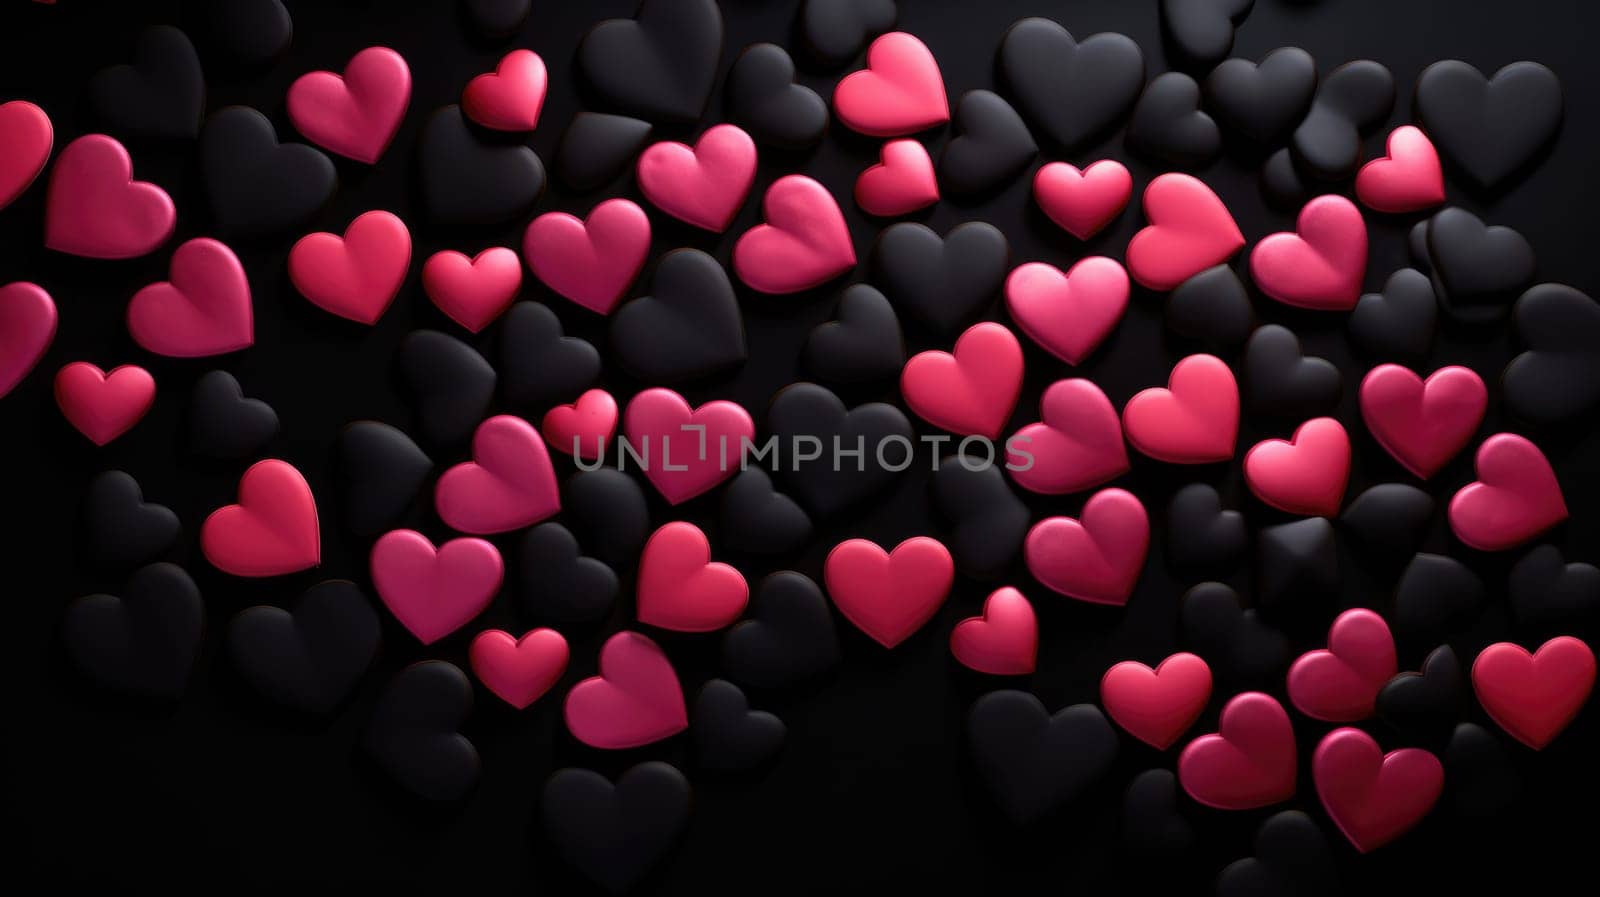 Pink and black heart shaped rocks on black background. Pile of white heart pebble, stone. Valentine's day. Heart shape of pebble on small peddles